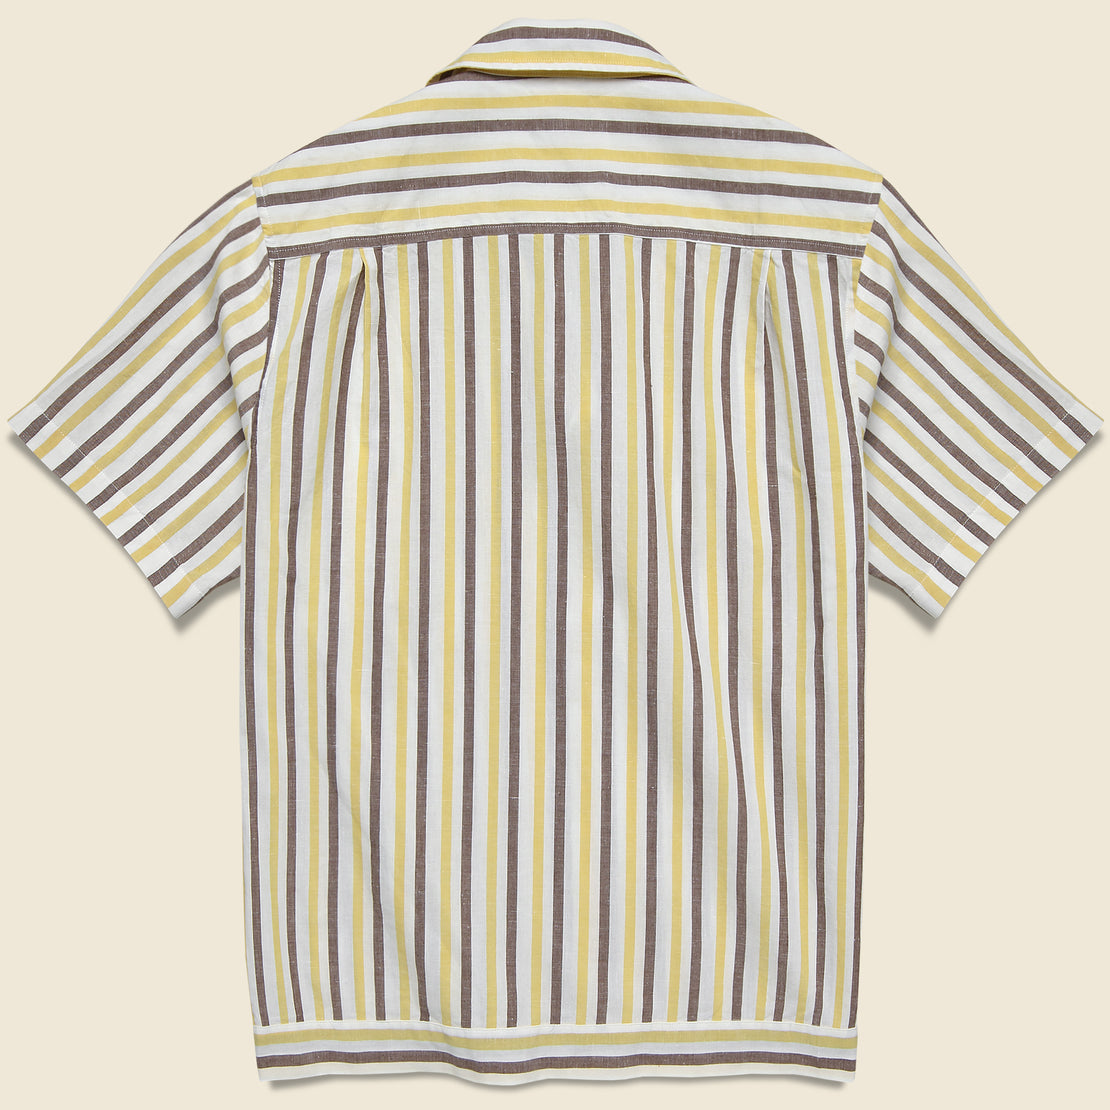 Highway Shirt - White/Brown/Yellow - Knickerbocker - STAG Provisions - Tops - S/S Woven - Stripe